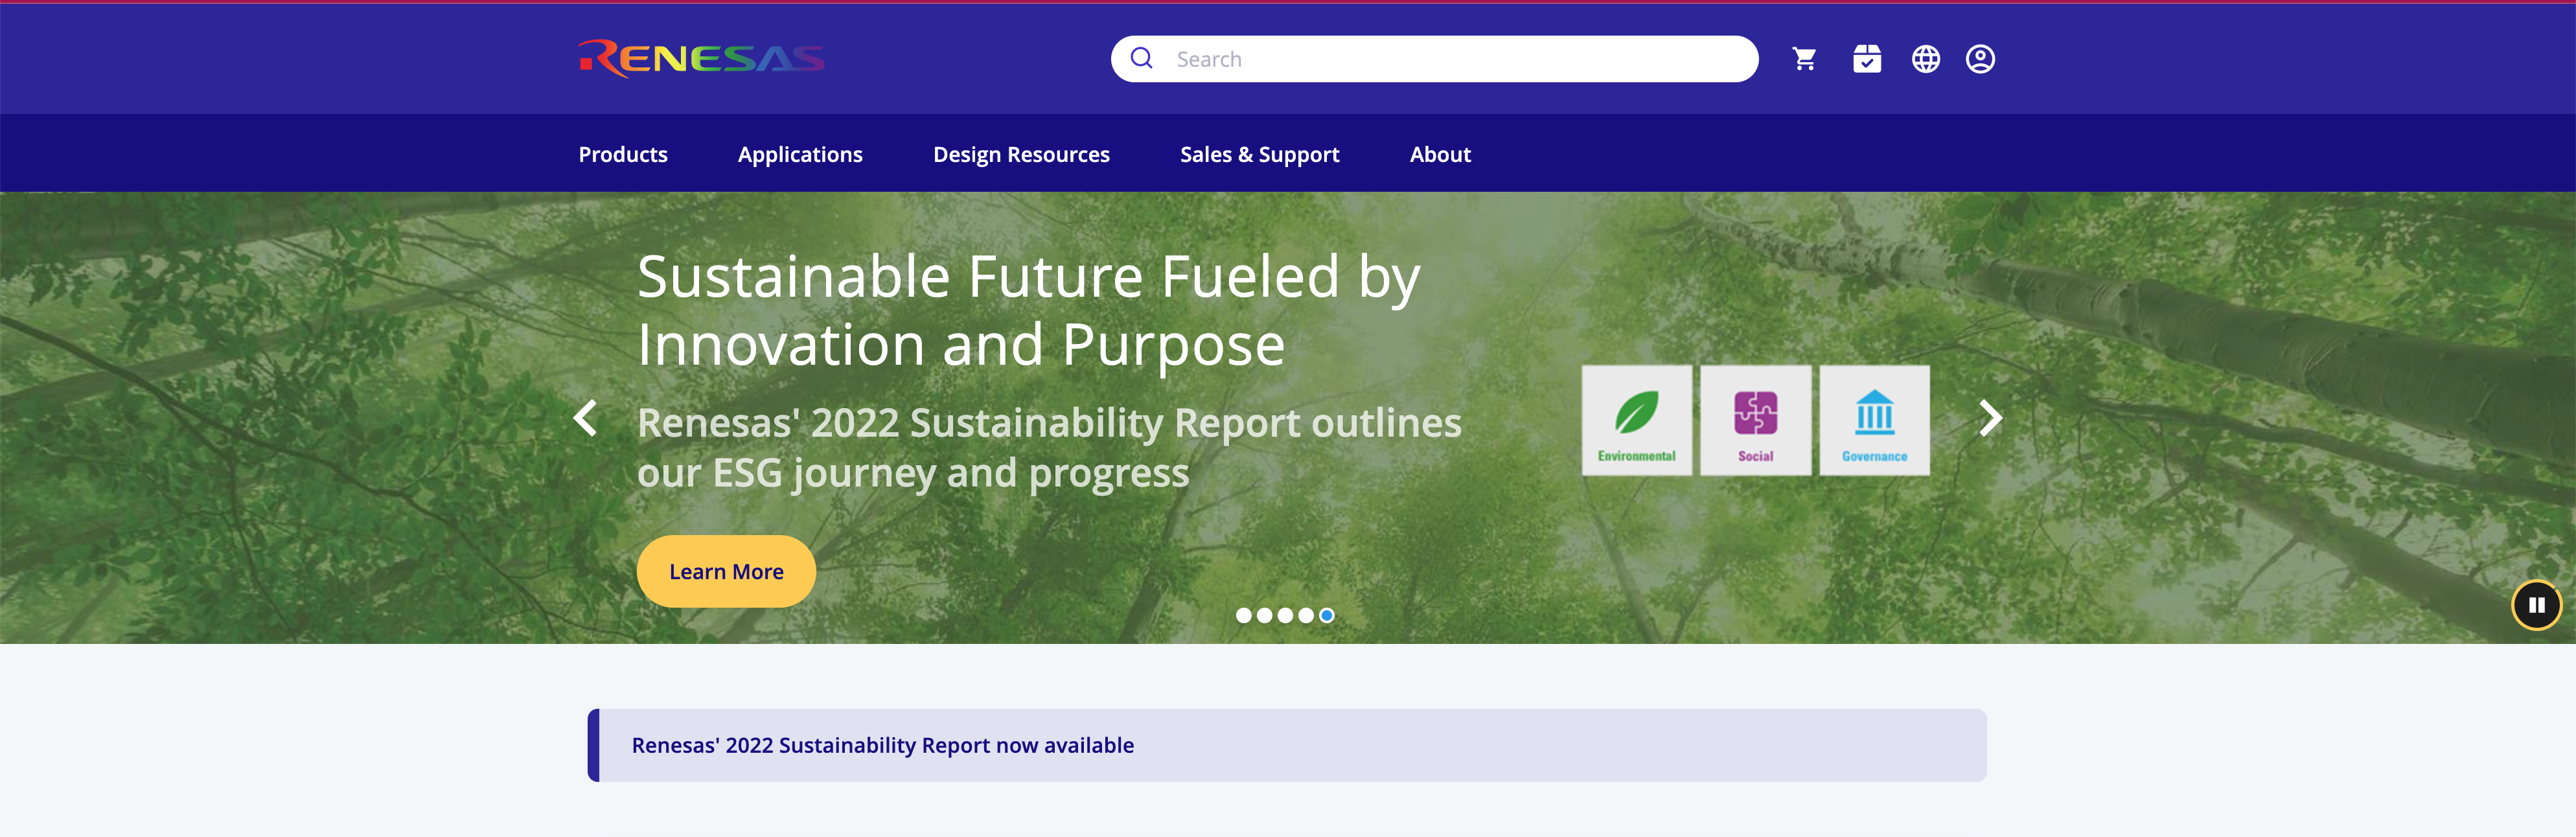 Renesas 2022 Sustainability Report promotional website banner